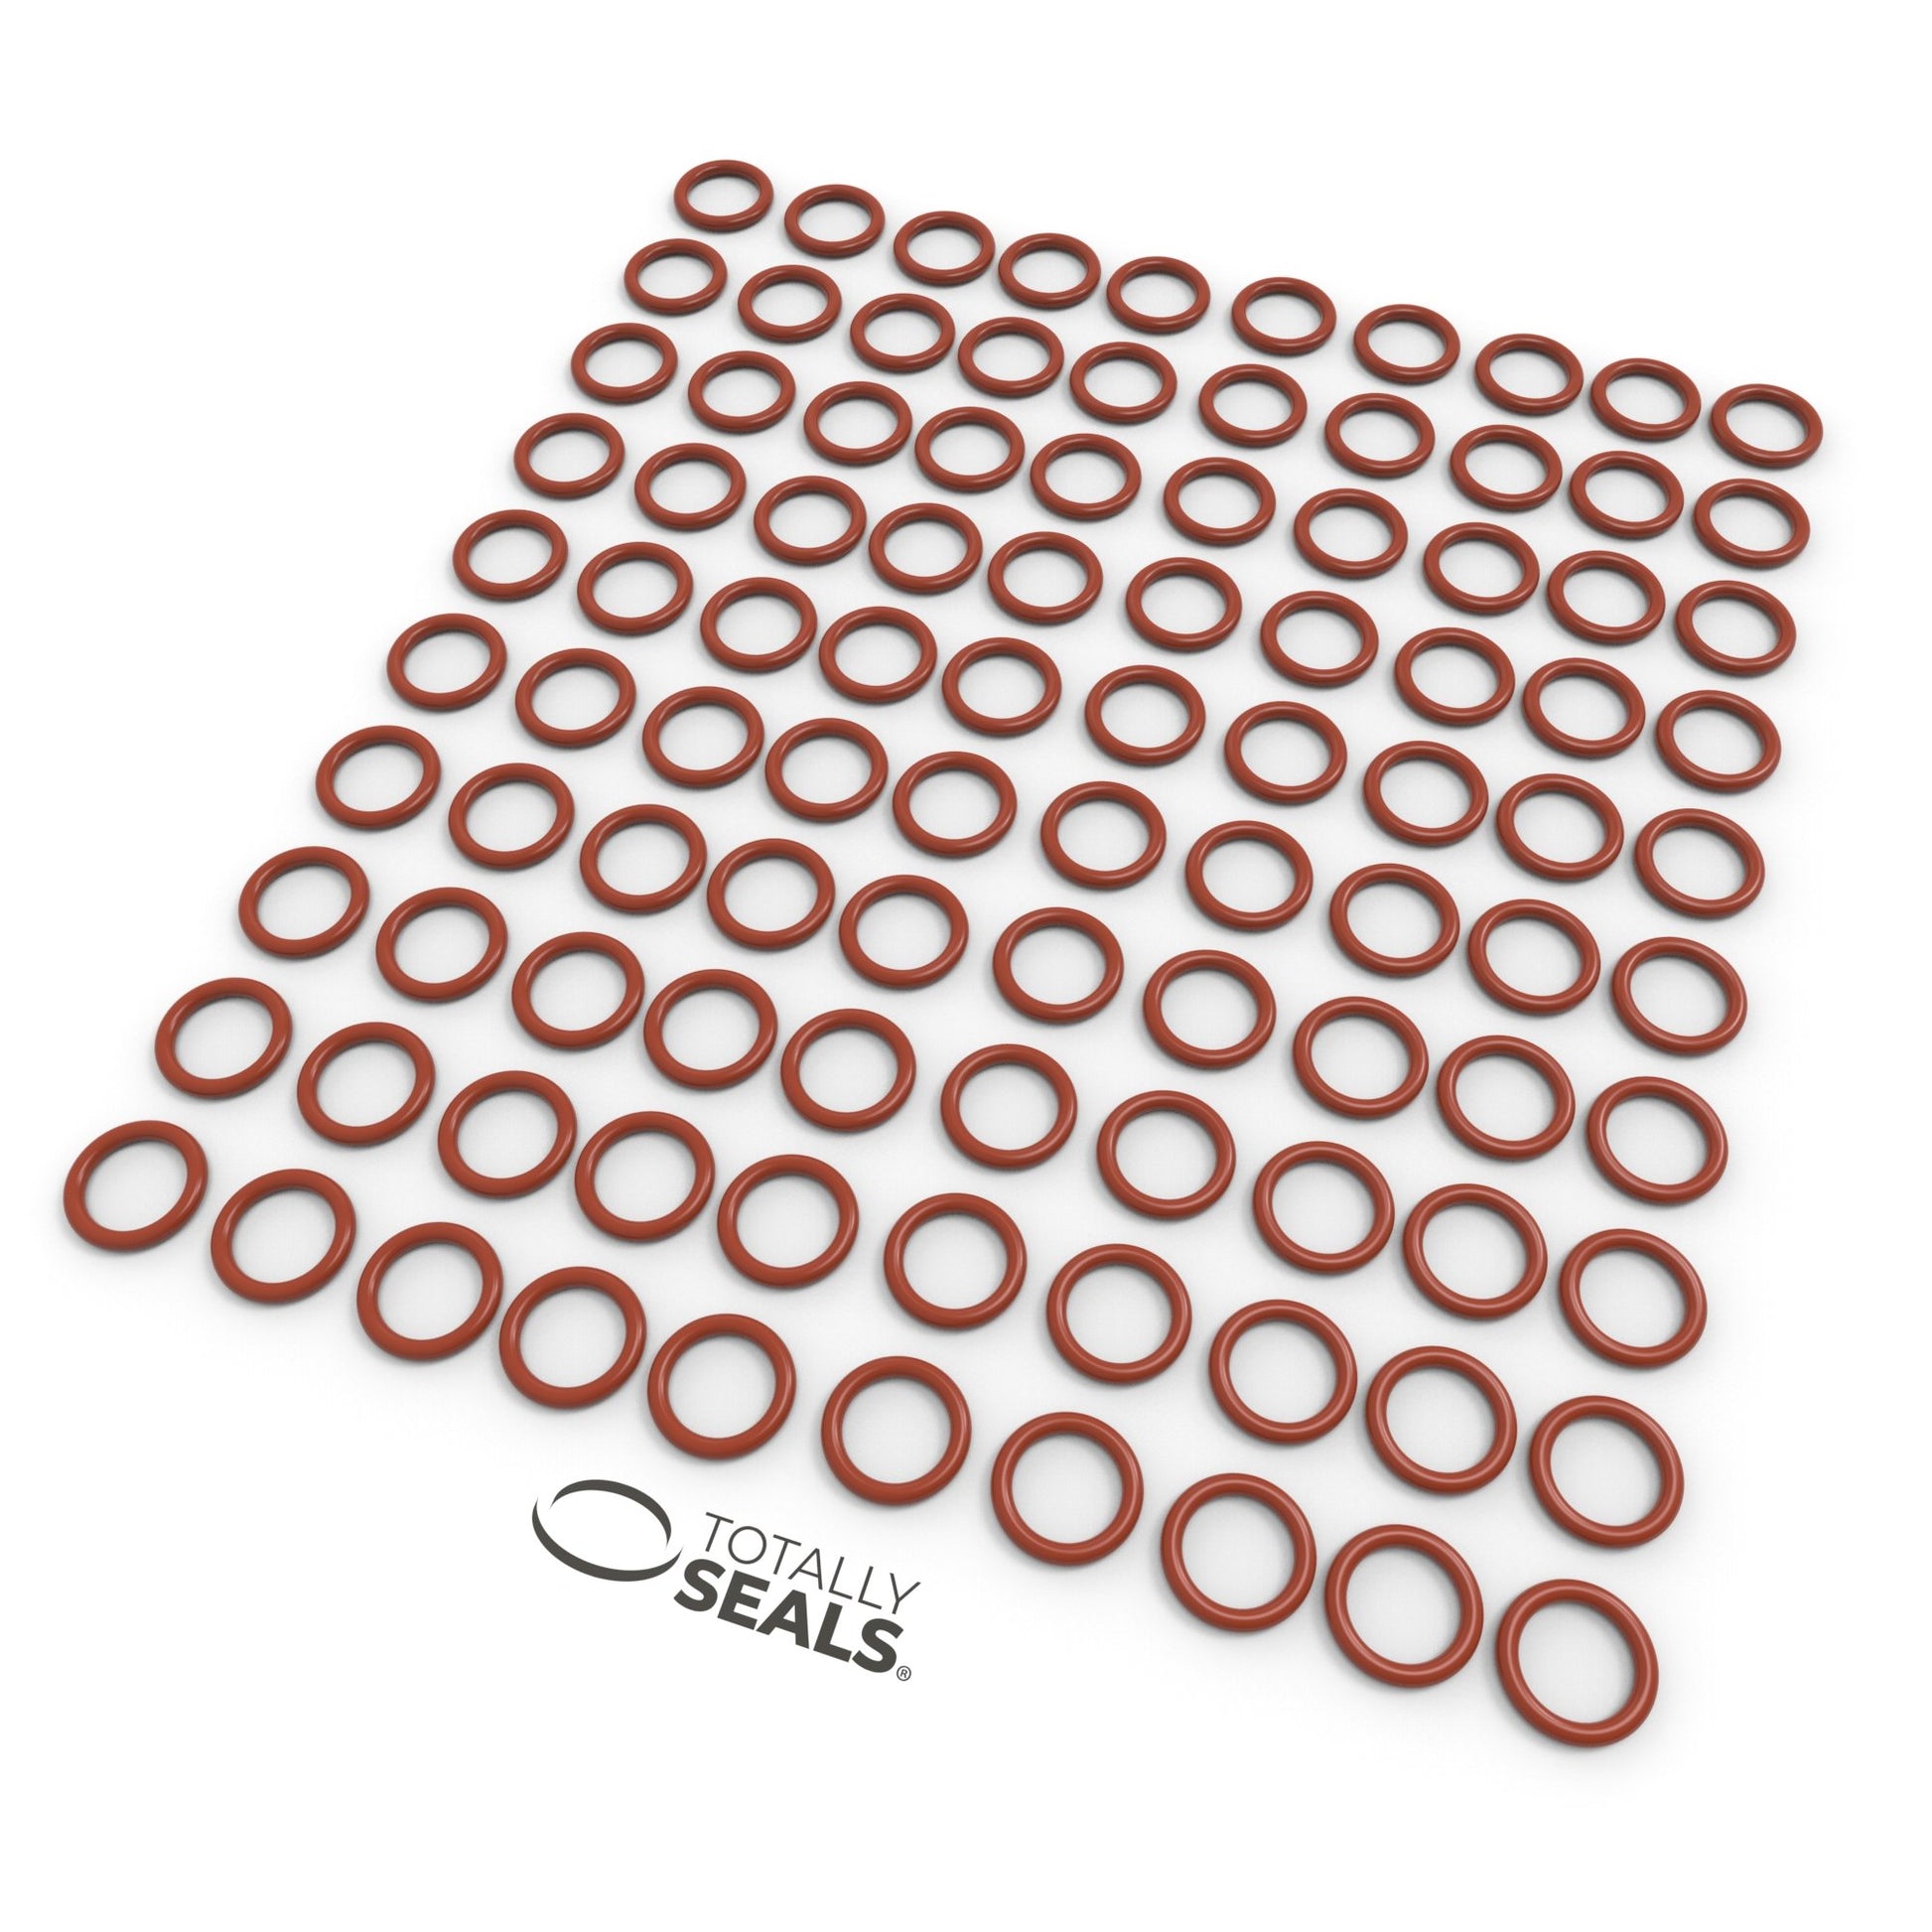 19mm x 2.5mm (24mm OD) Silicone O-Rings - Totally Seals®